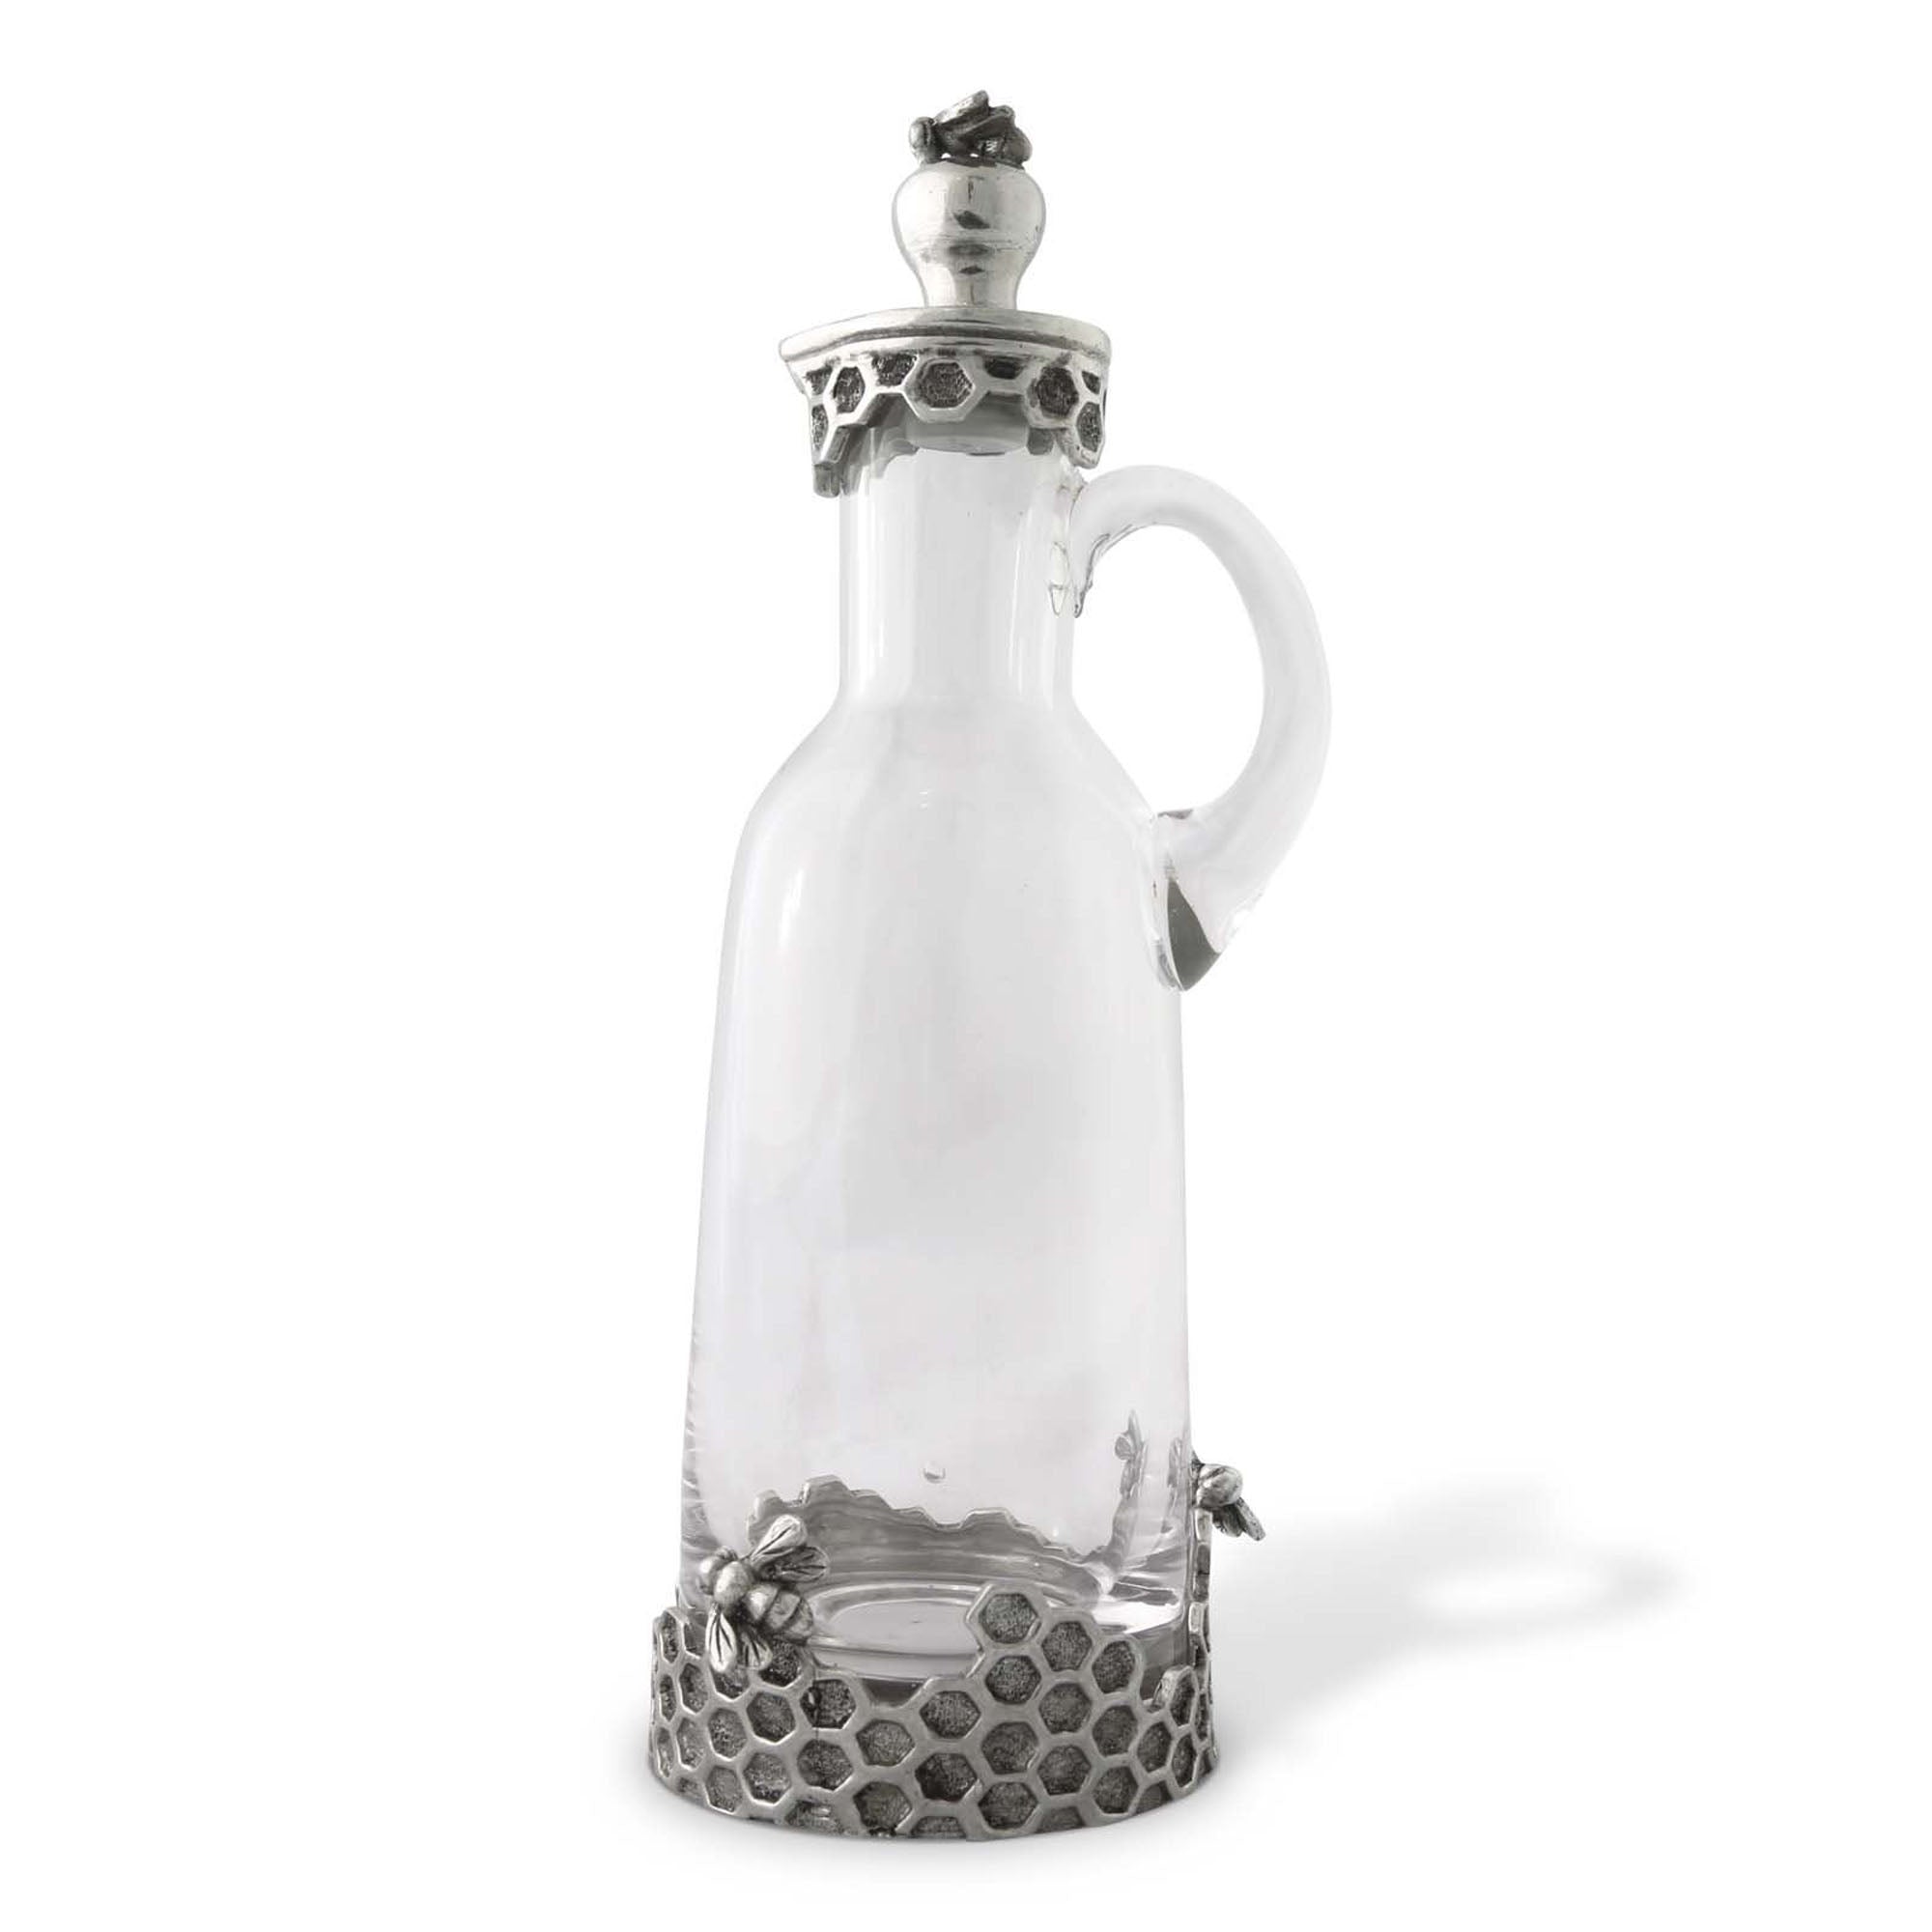 Vagabond House Bee Syrup Pitcher Product Image